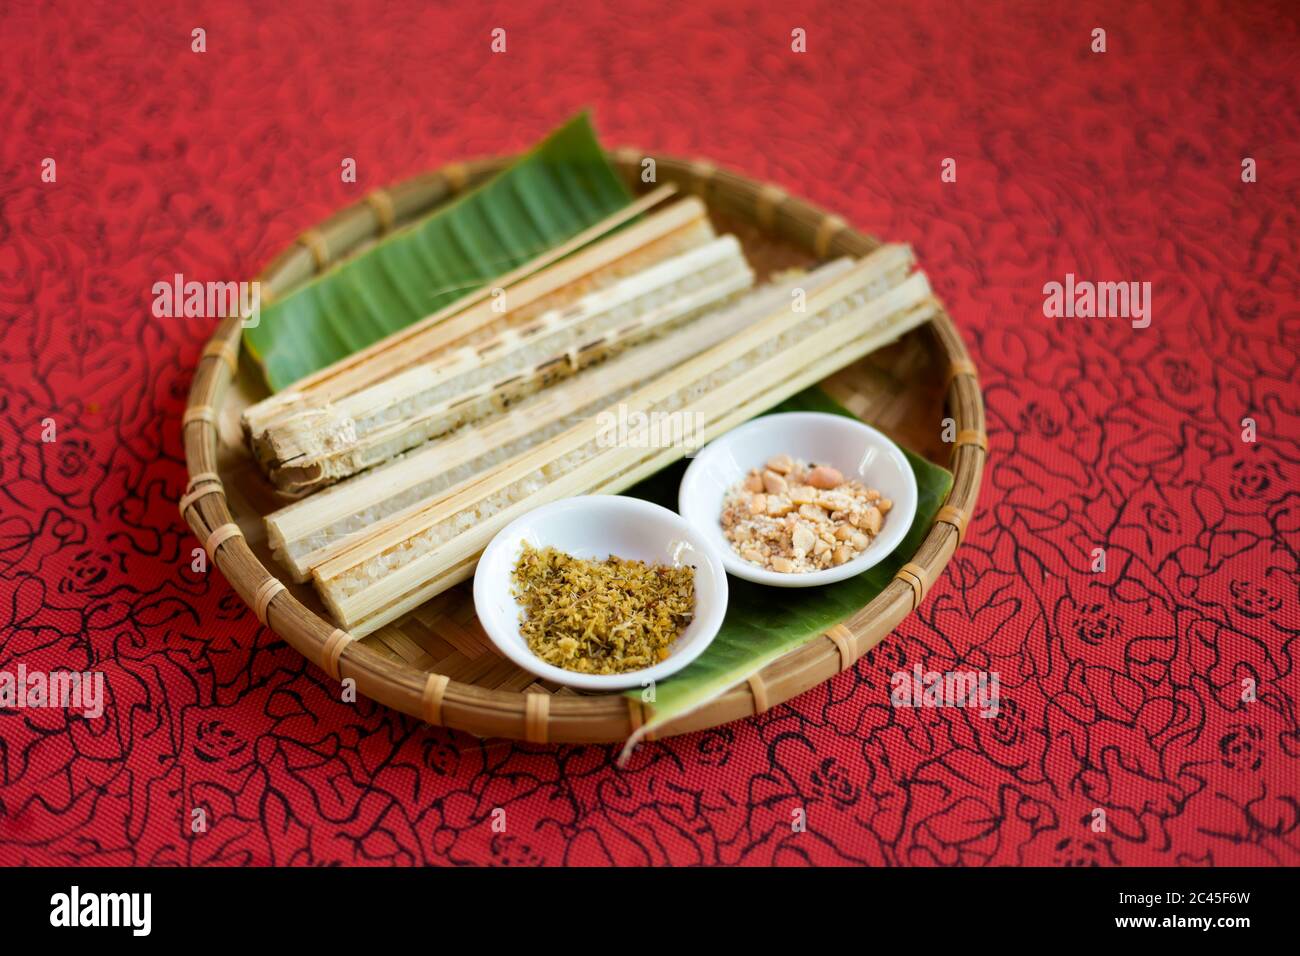 Delicious rice baked on a fire in a bamboo. Traditional vietnamese cuisine served in restaurant in Ba Ria, Vietnam. Stock Photo